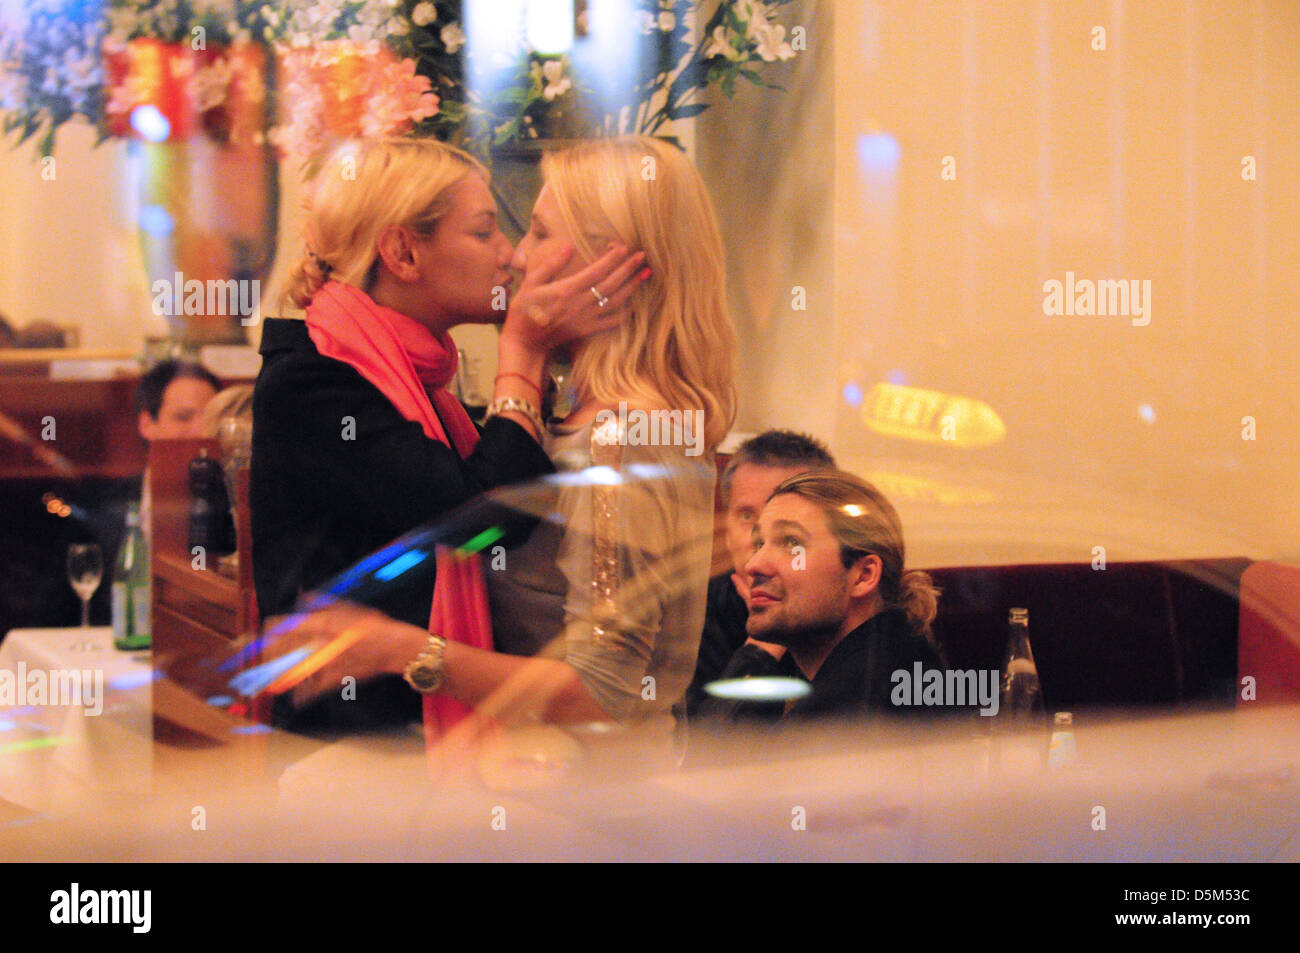 David Garrett watching as his two female companions kiss each other at Borchardt restaurant. Berlin, Germany - 27.04.2011 Stock Photo